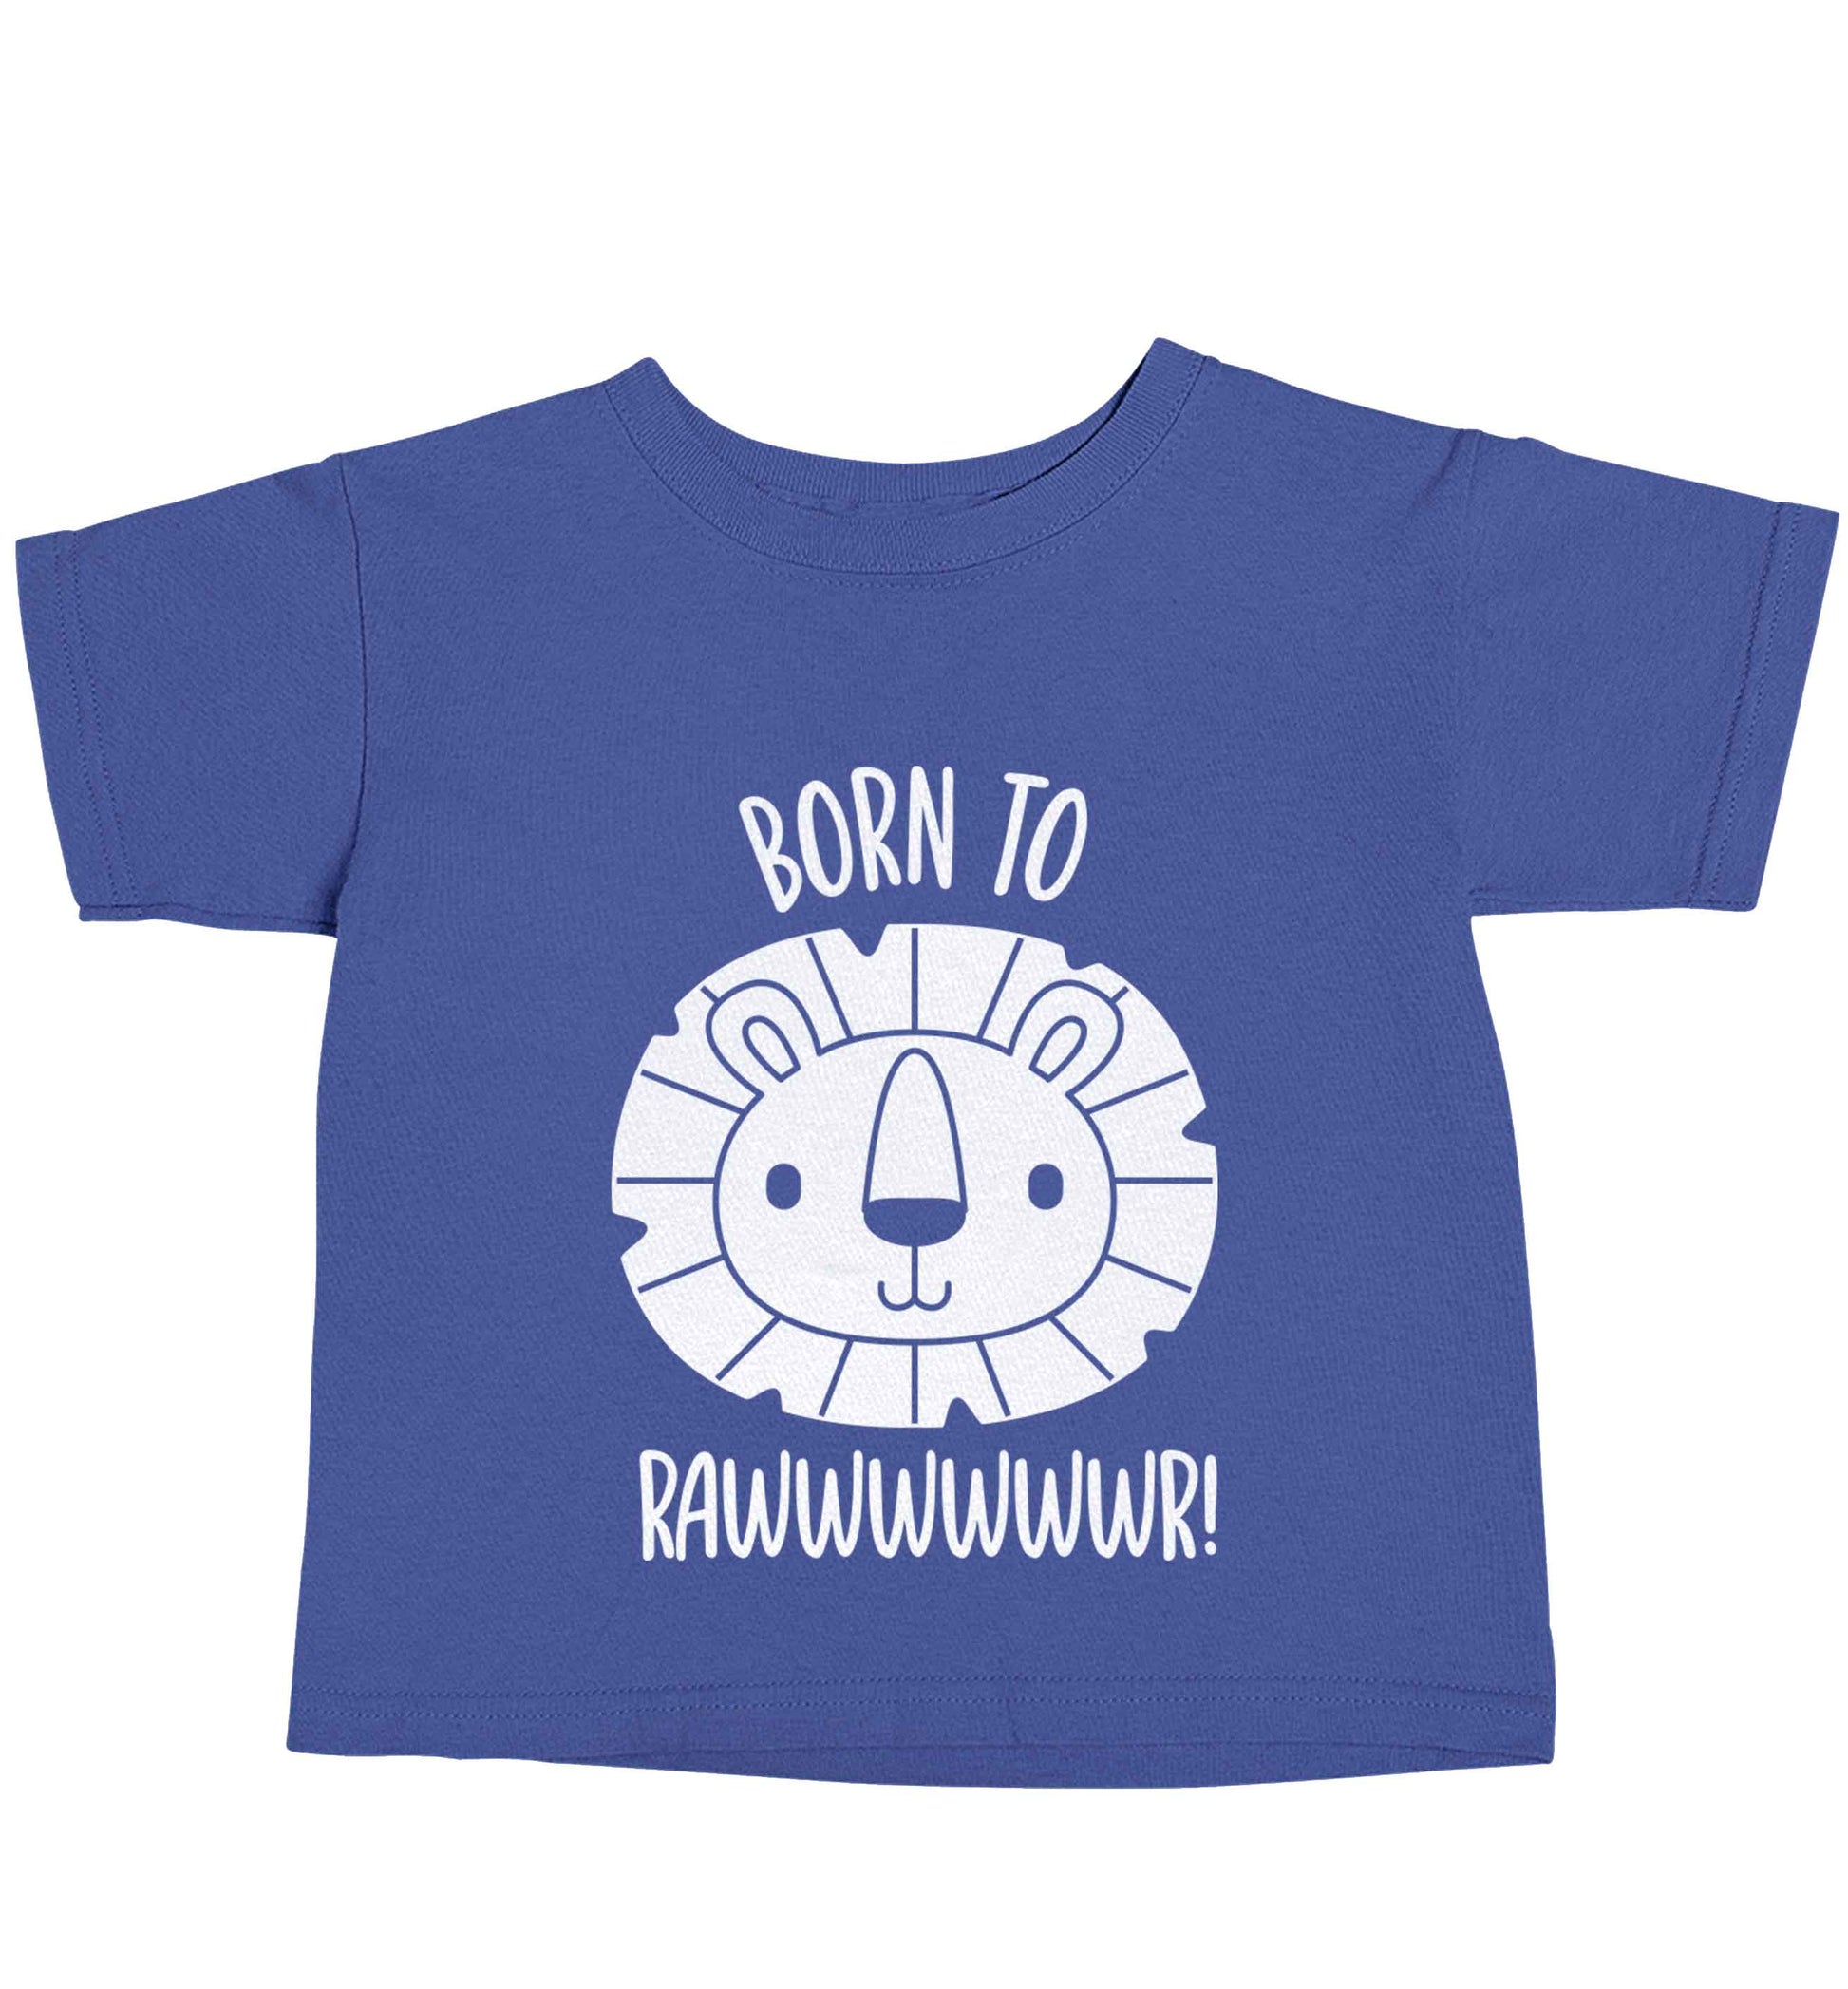 Born to rawr blue baby toddler Tshirt 2 Years